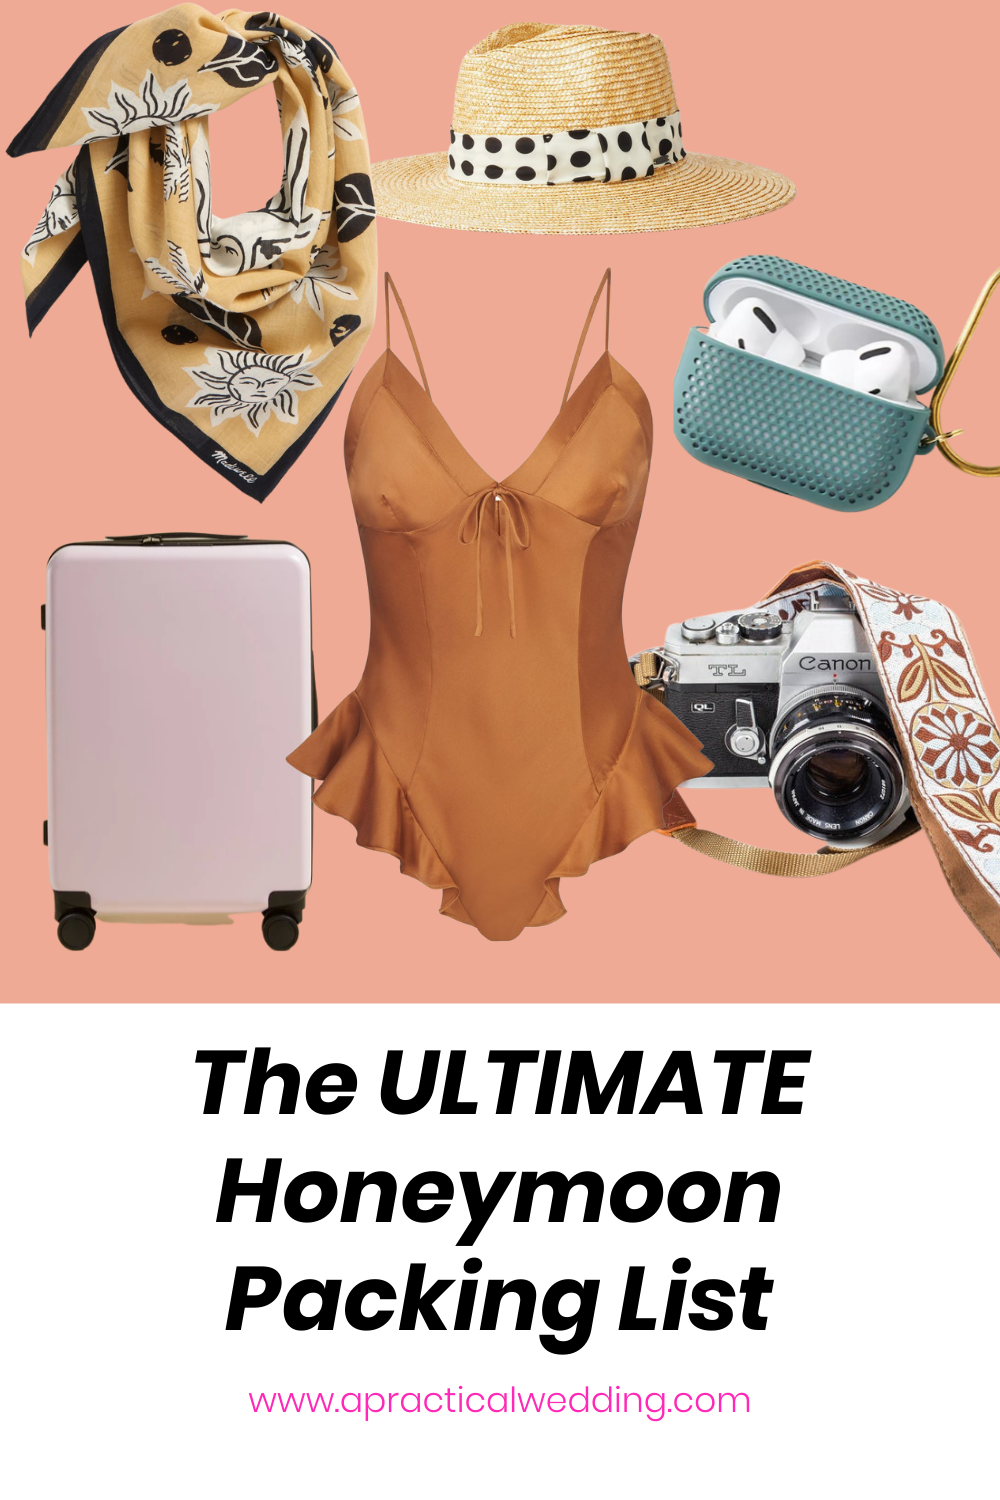 The ULTIMATE Honeymoon Packing List 1 - Honeymoon Packing List and Checklist